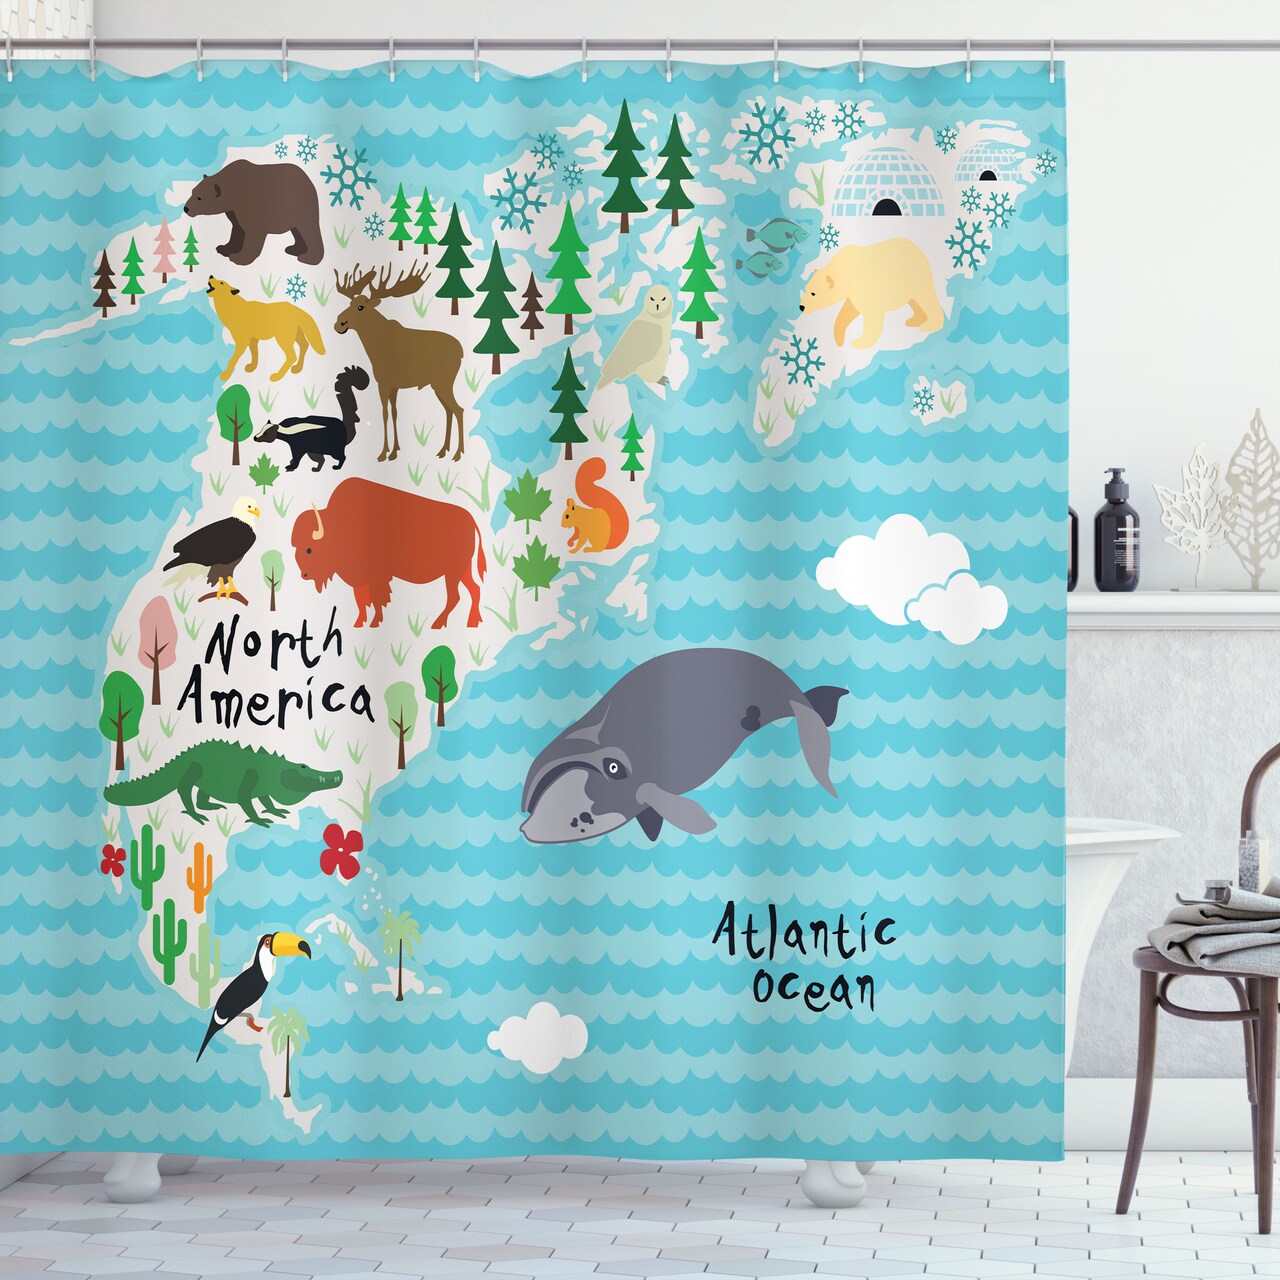 Ambesonne North America Shower Curtain Continent Map With Cartoon Style Indigenous Animals Bear Moose Whale Gator Cloth Fabric Bathroom Decor Set Hooks 69 W X 70 L Turquoise Grey Michaels